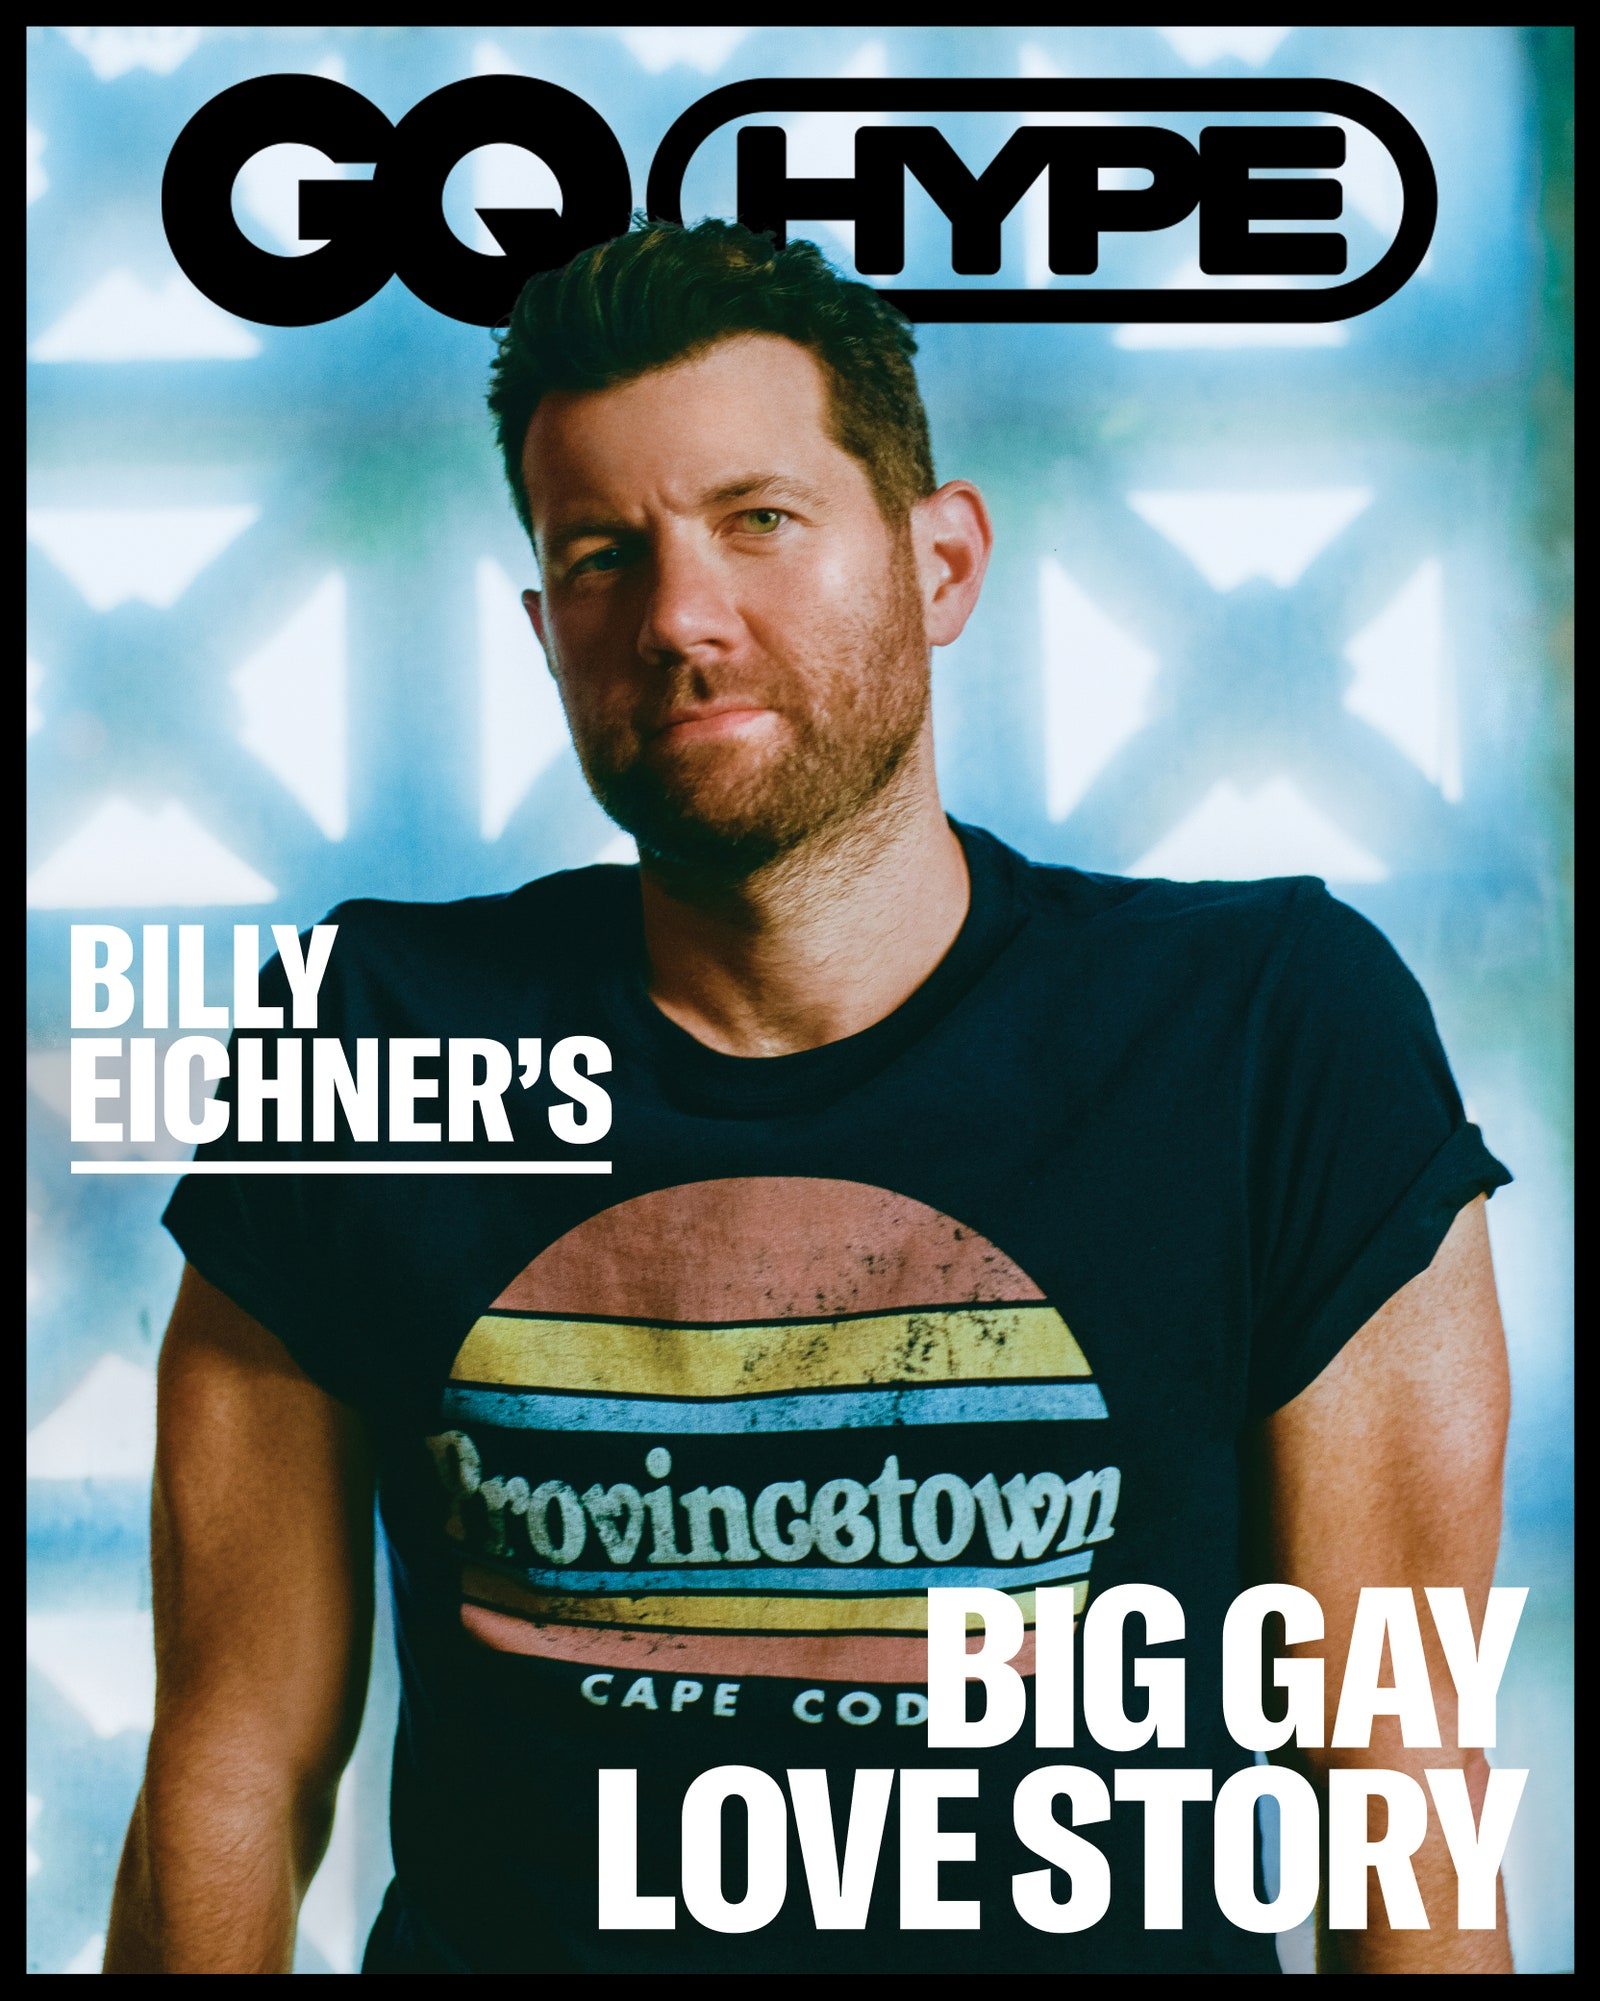 BILLY EICHNER BELIEVES A FUNNY GAY COMEDY IS THE BEST ACTIVISM 